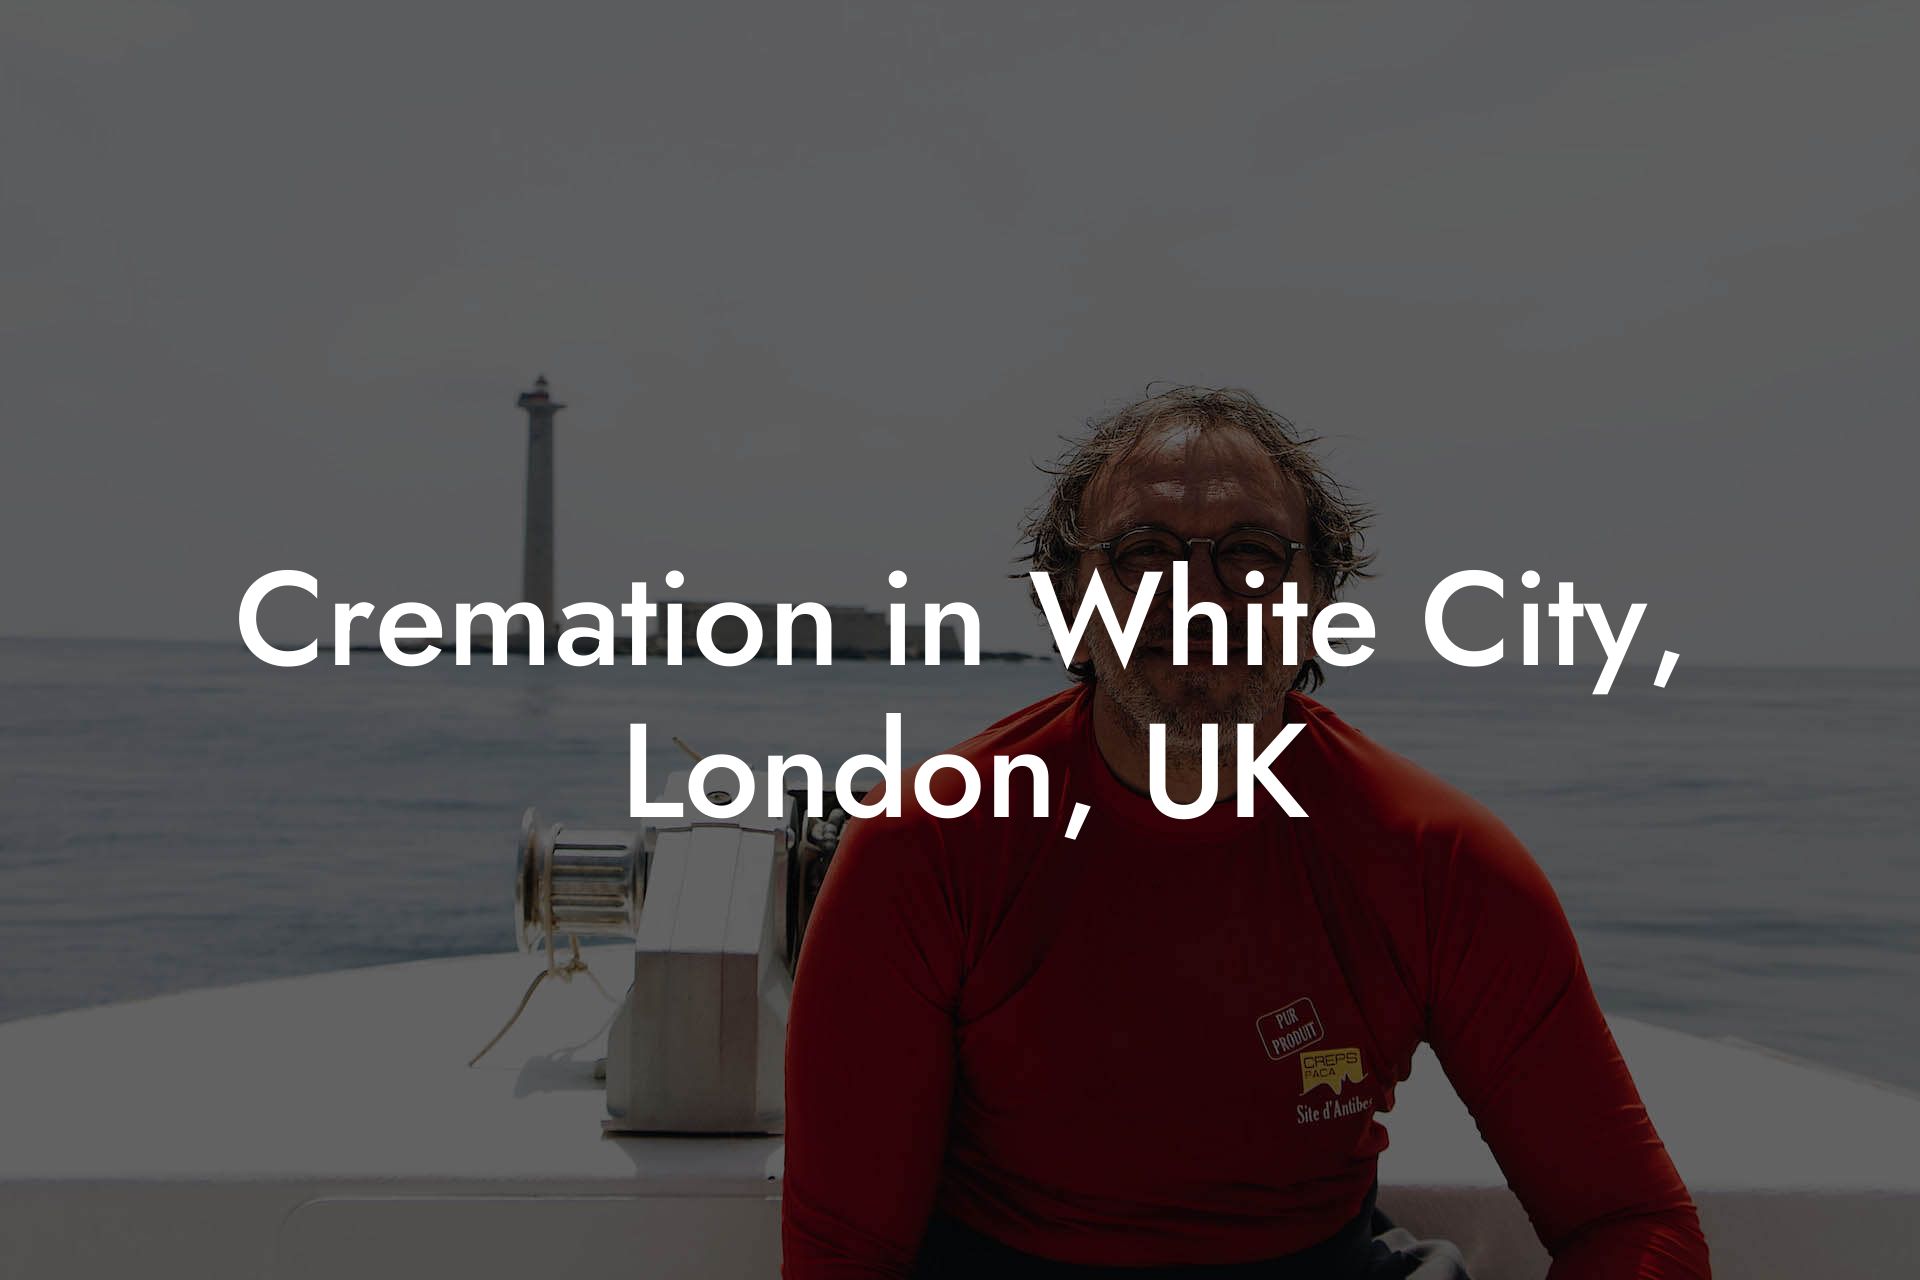 Cremation in White City, London, UK